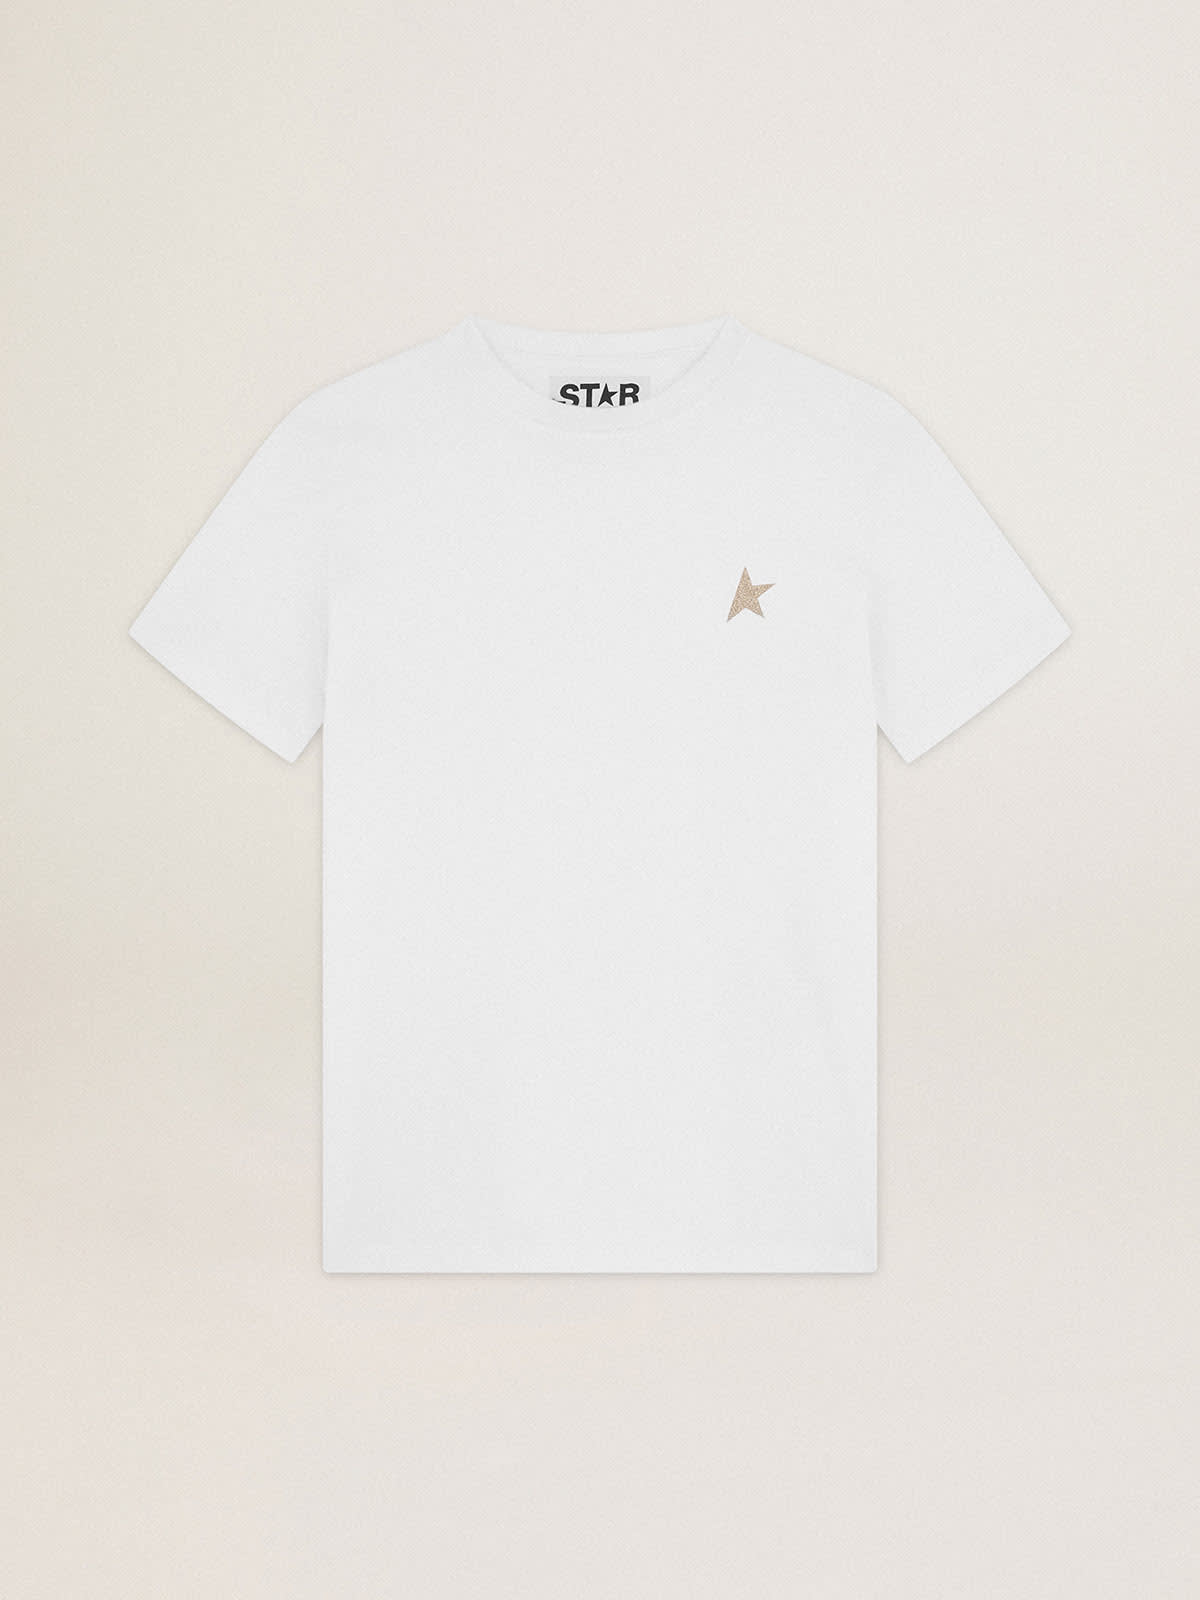 Golden Goose - White Star Collection T-shirt with star in gold glitter on the front in 